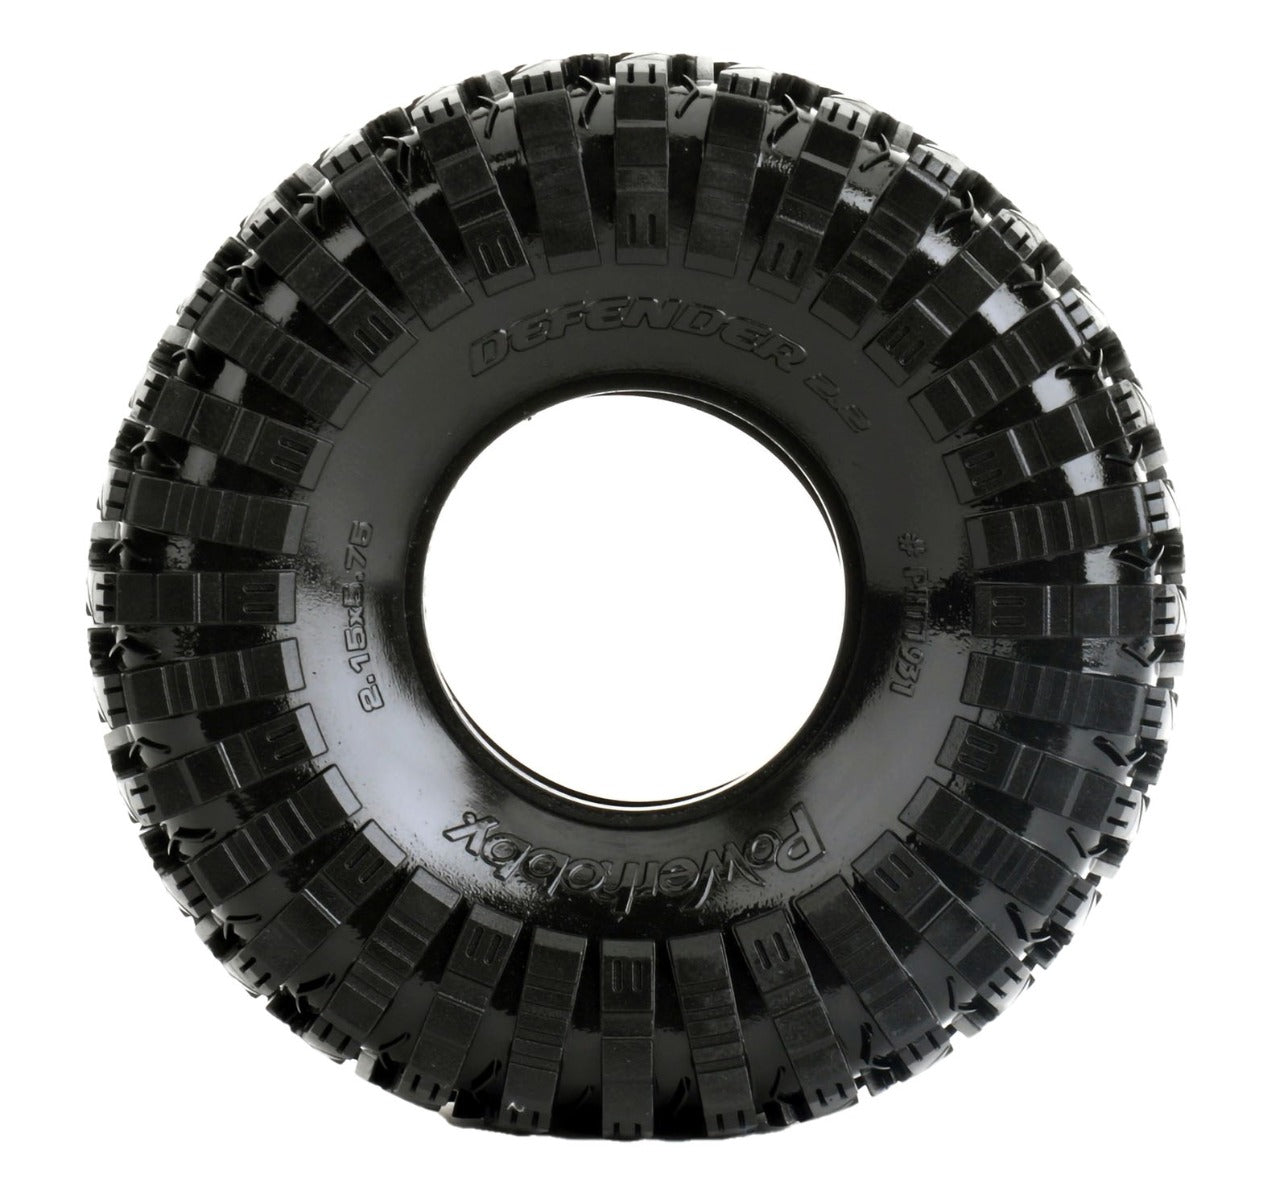 Powerhobby Defender 2.2 Crawler Tires with Dual Stage Soft and Medium Foams - PowerHobby